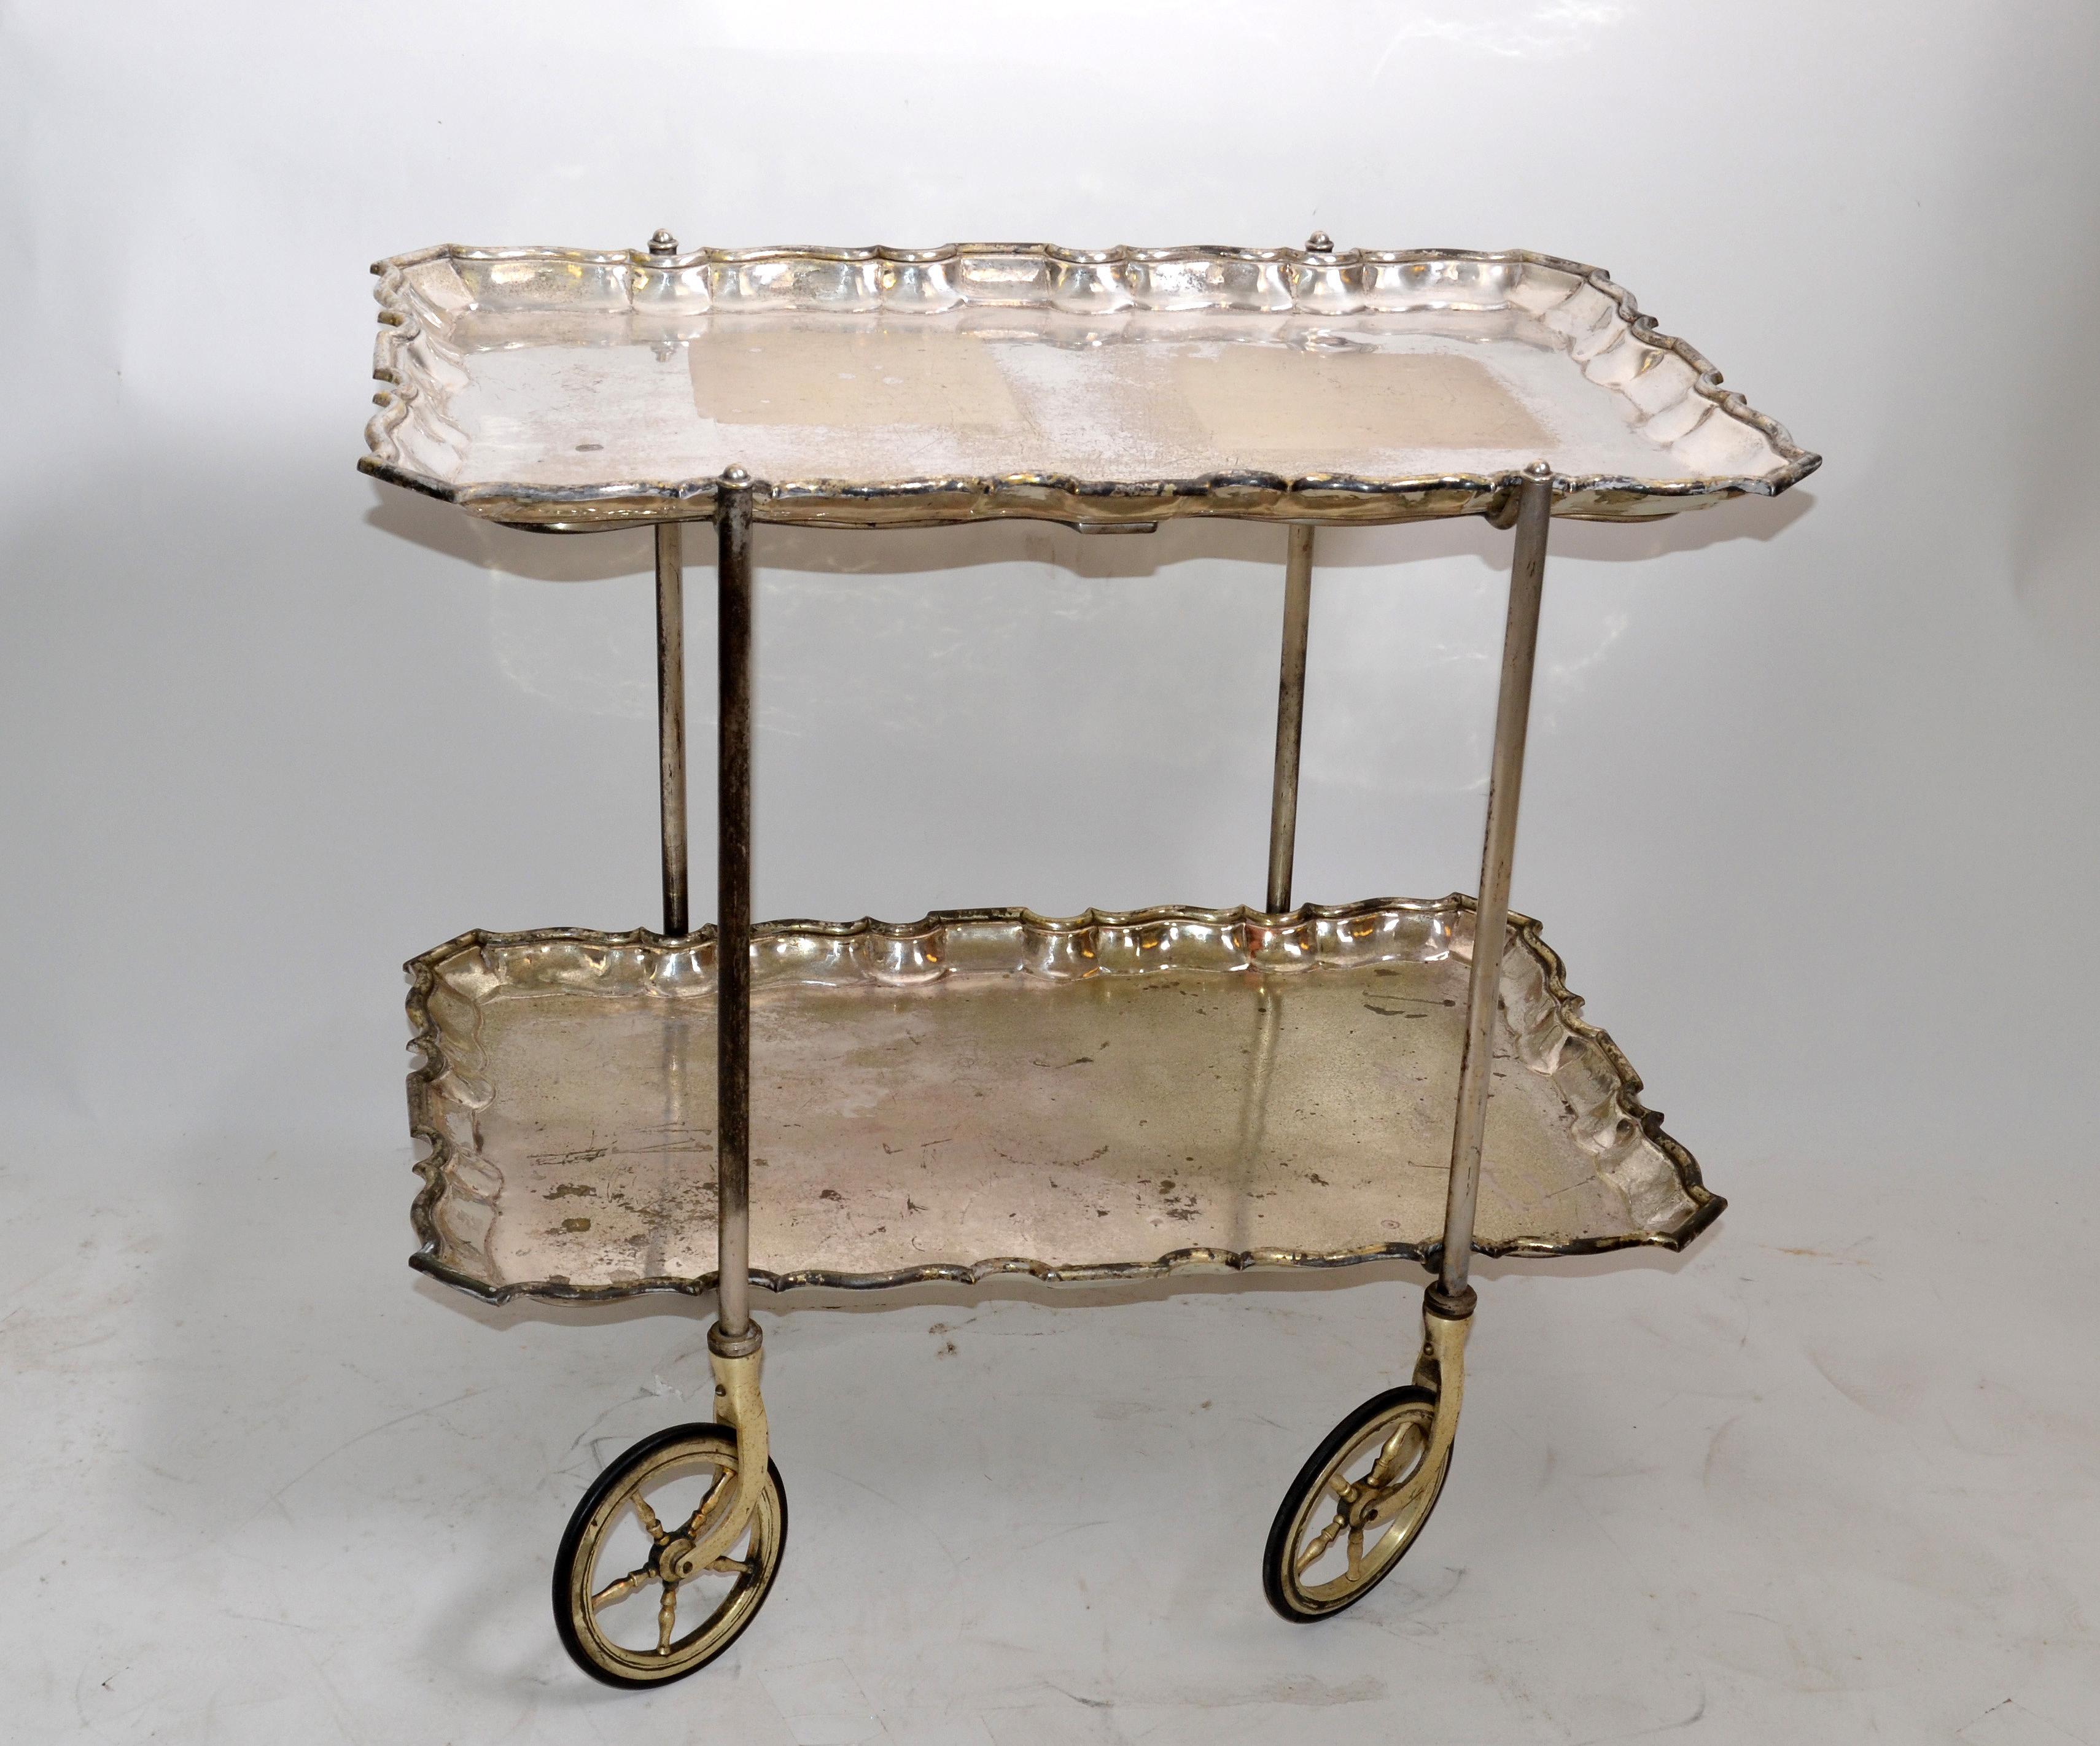 Italian neoclassical silvered two tray bar cart on the original casters from the late 60s.
Designed by Carlo Mozzoni and made in Milano.
Stamped at the base and numbered 3265.
All original distressed look but functional and sturdy, wheels run